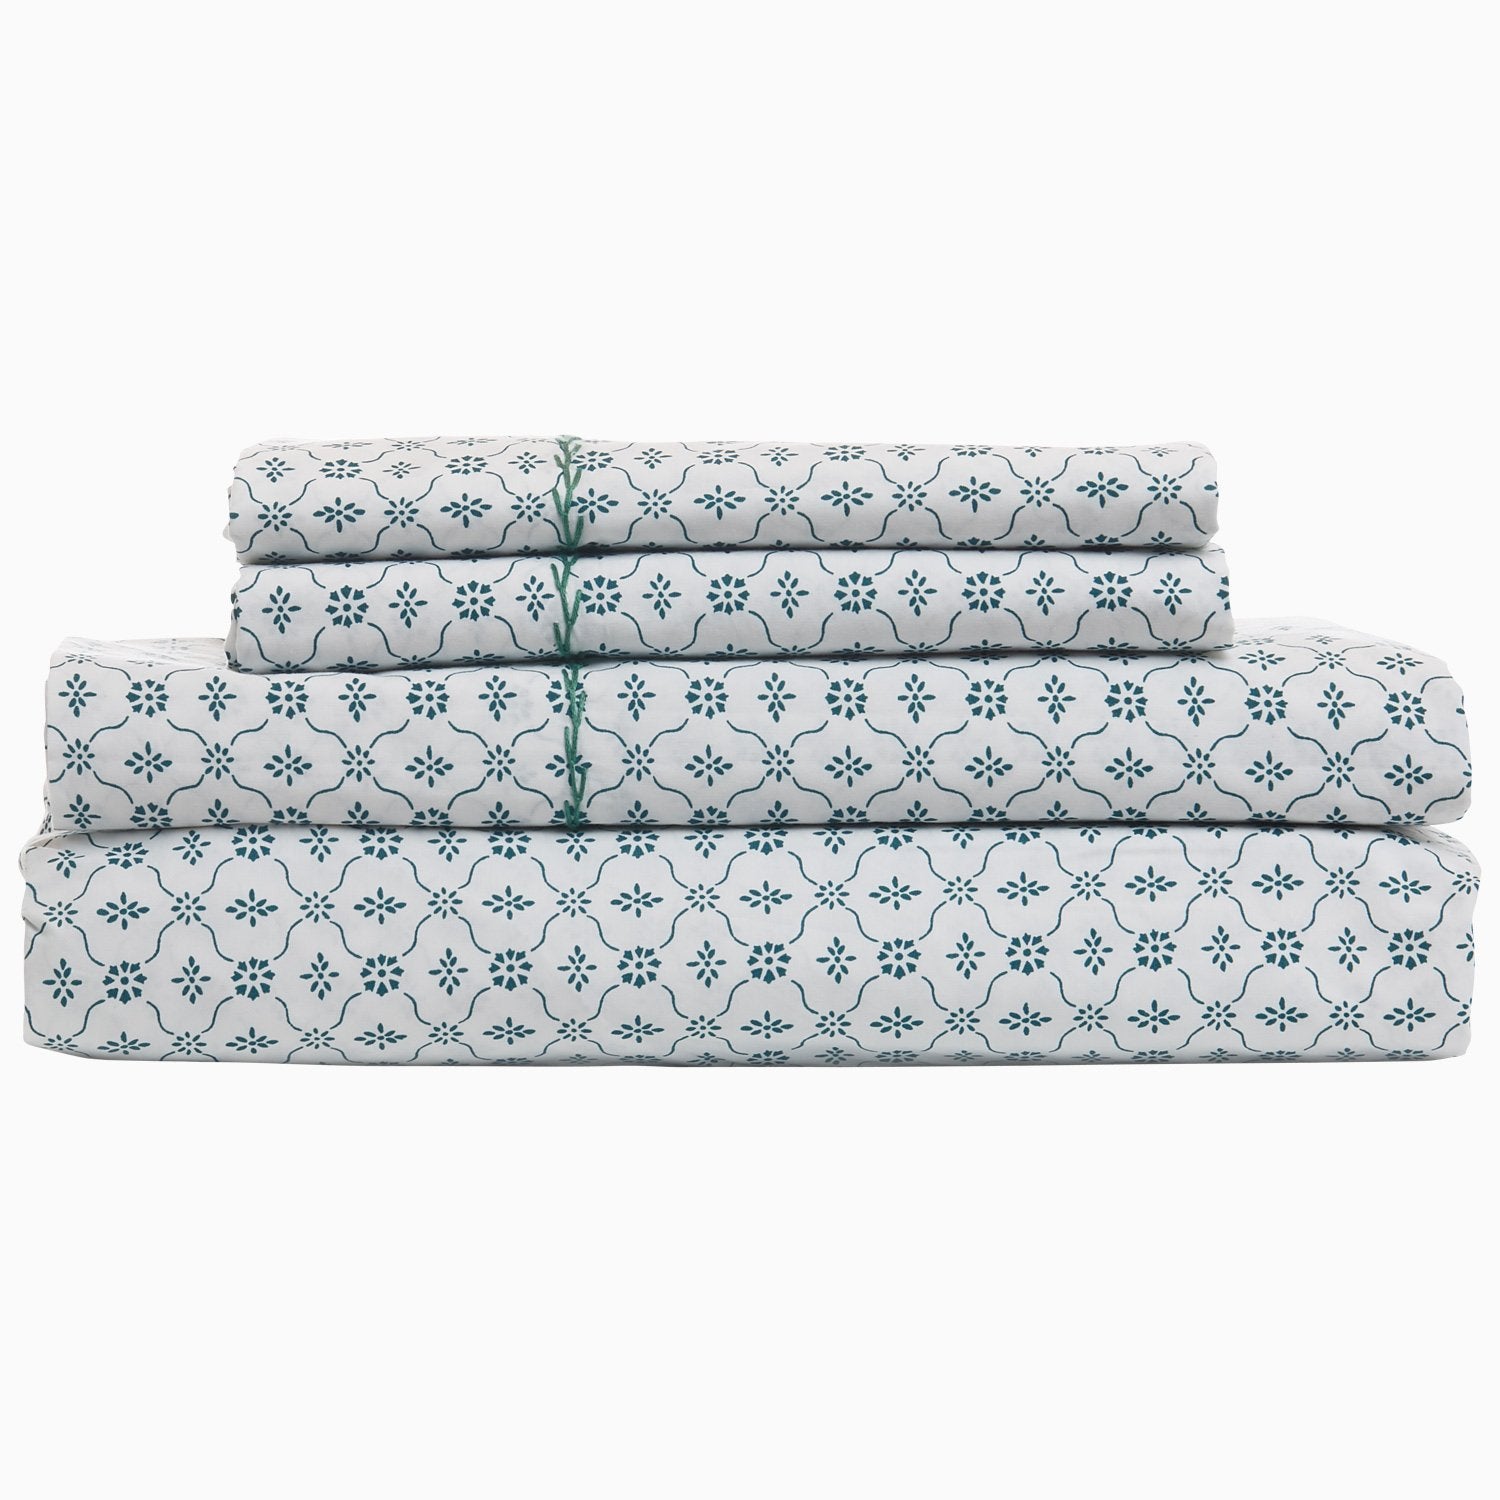 Sag Harbor Peacock Sheets & Cases by John Robshaw | Fig Linens